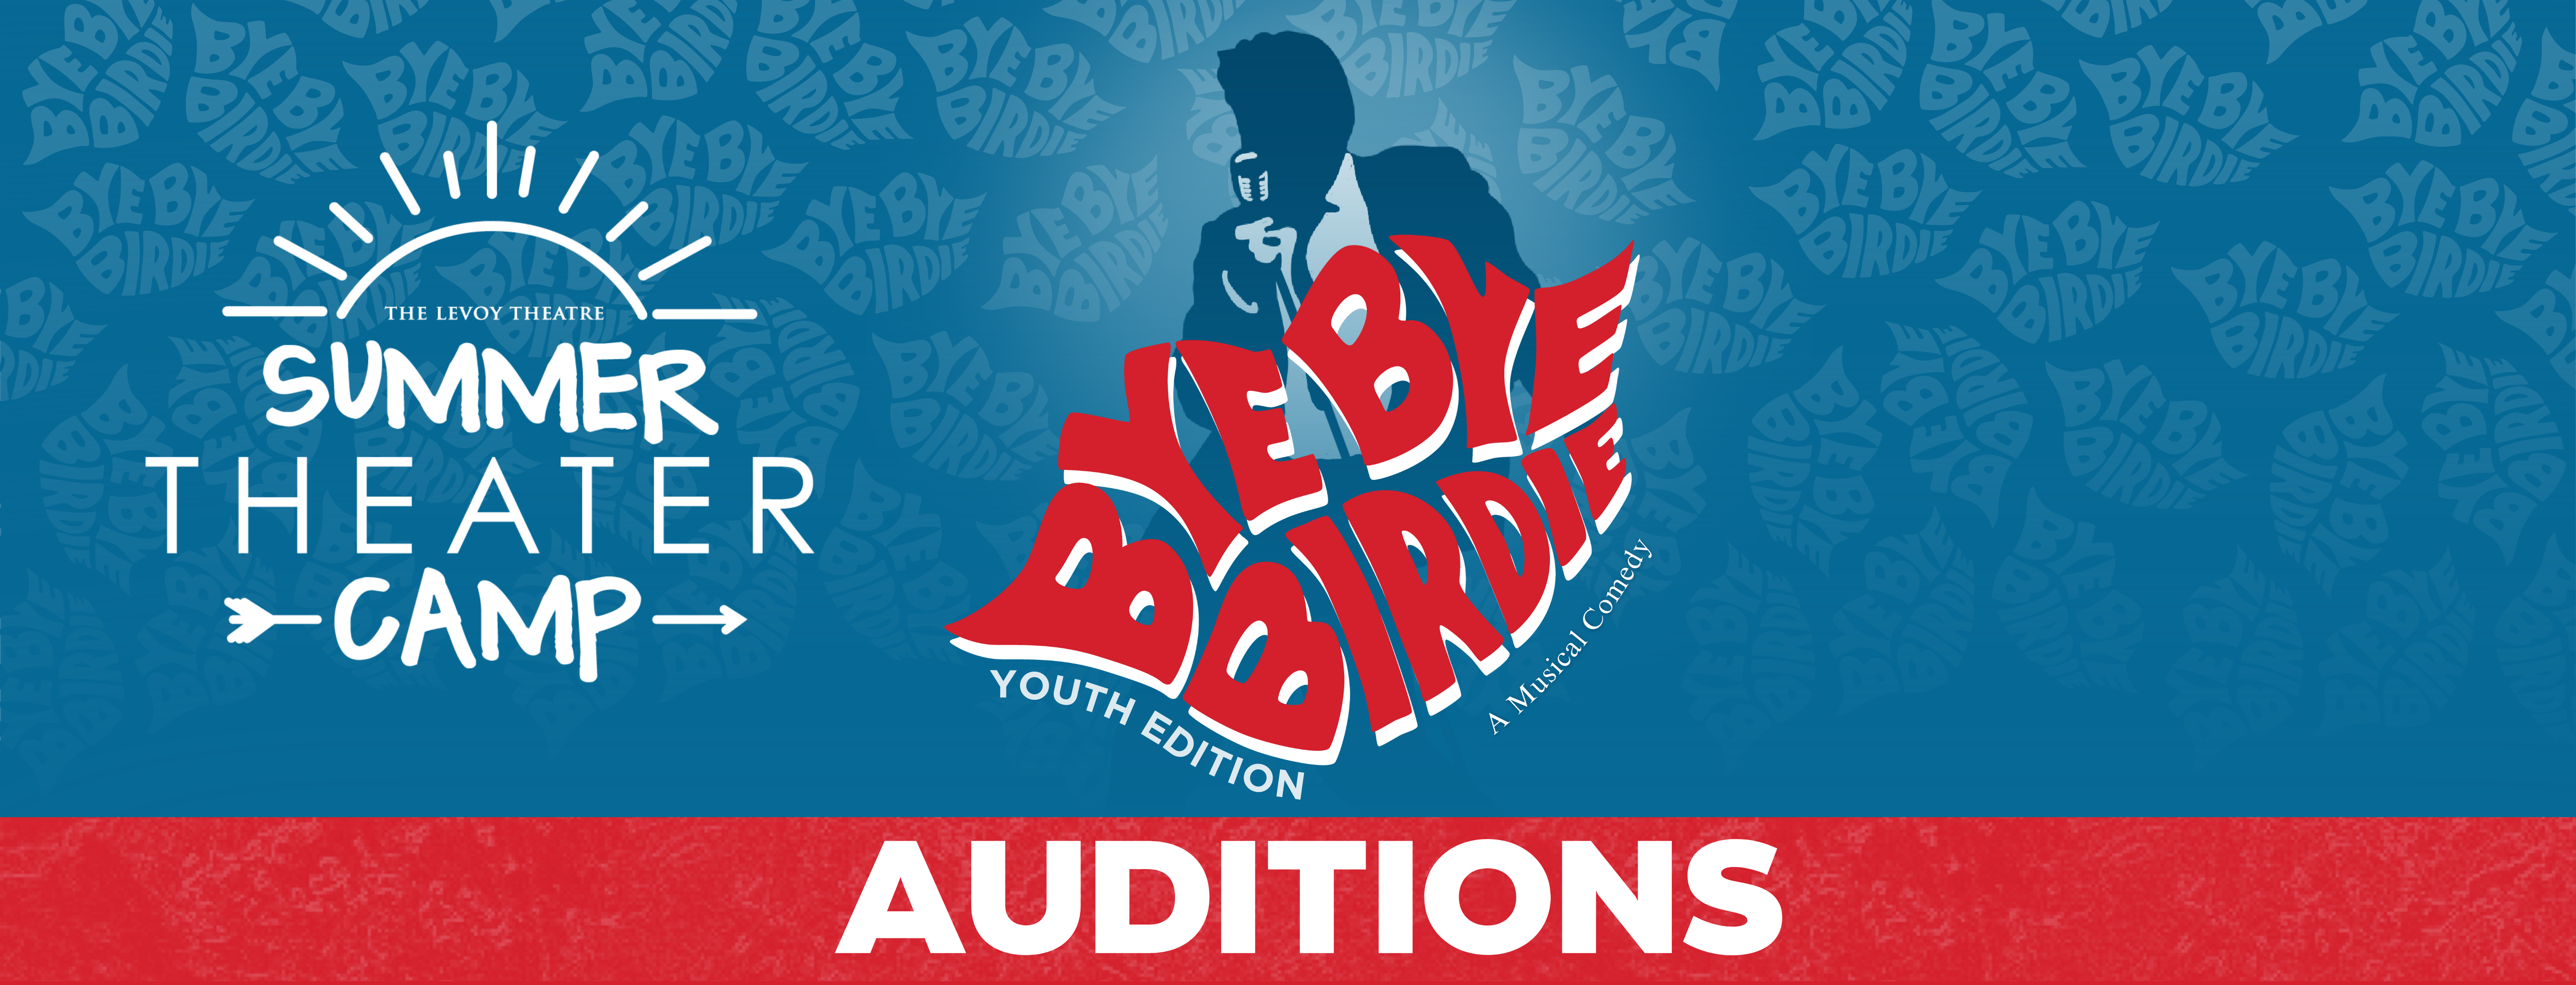 Bye Bye Birdie logo in red font, 50s style man behind logo. Levoy Summer Camp Logo in white color, right side. Red block at bottom with white text "Auditions"